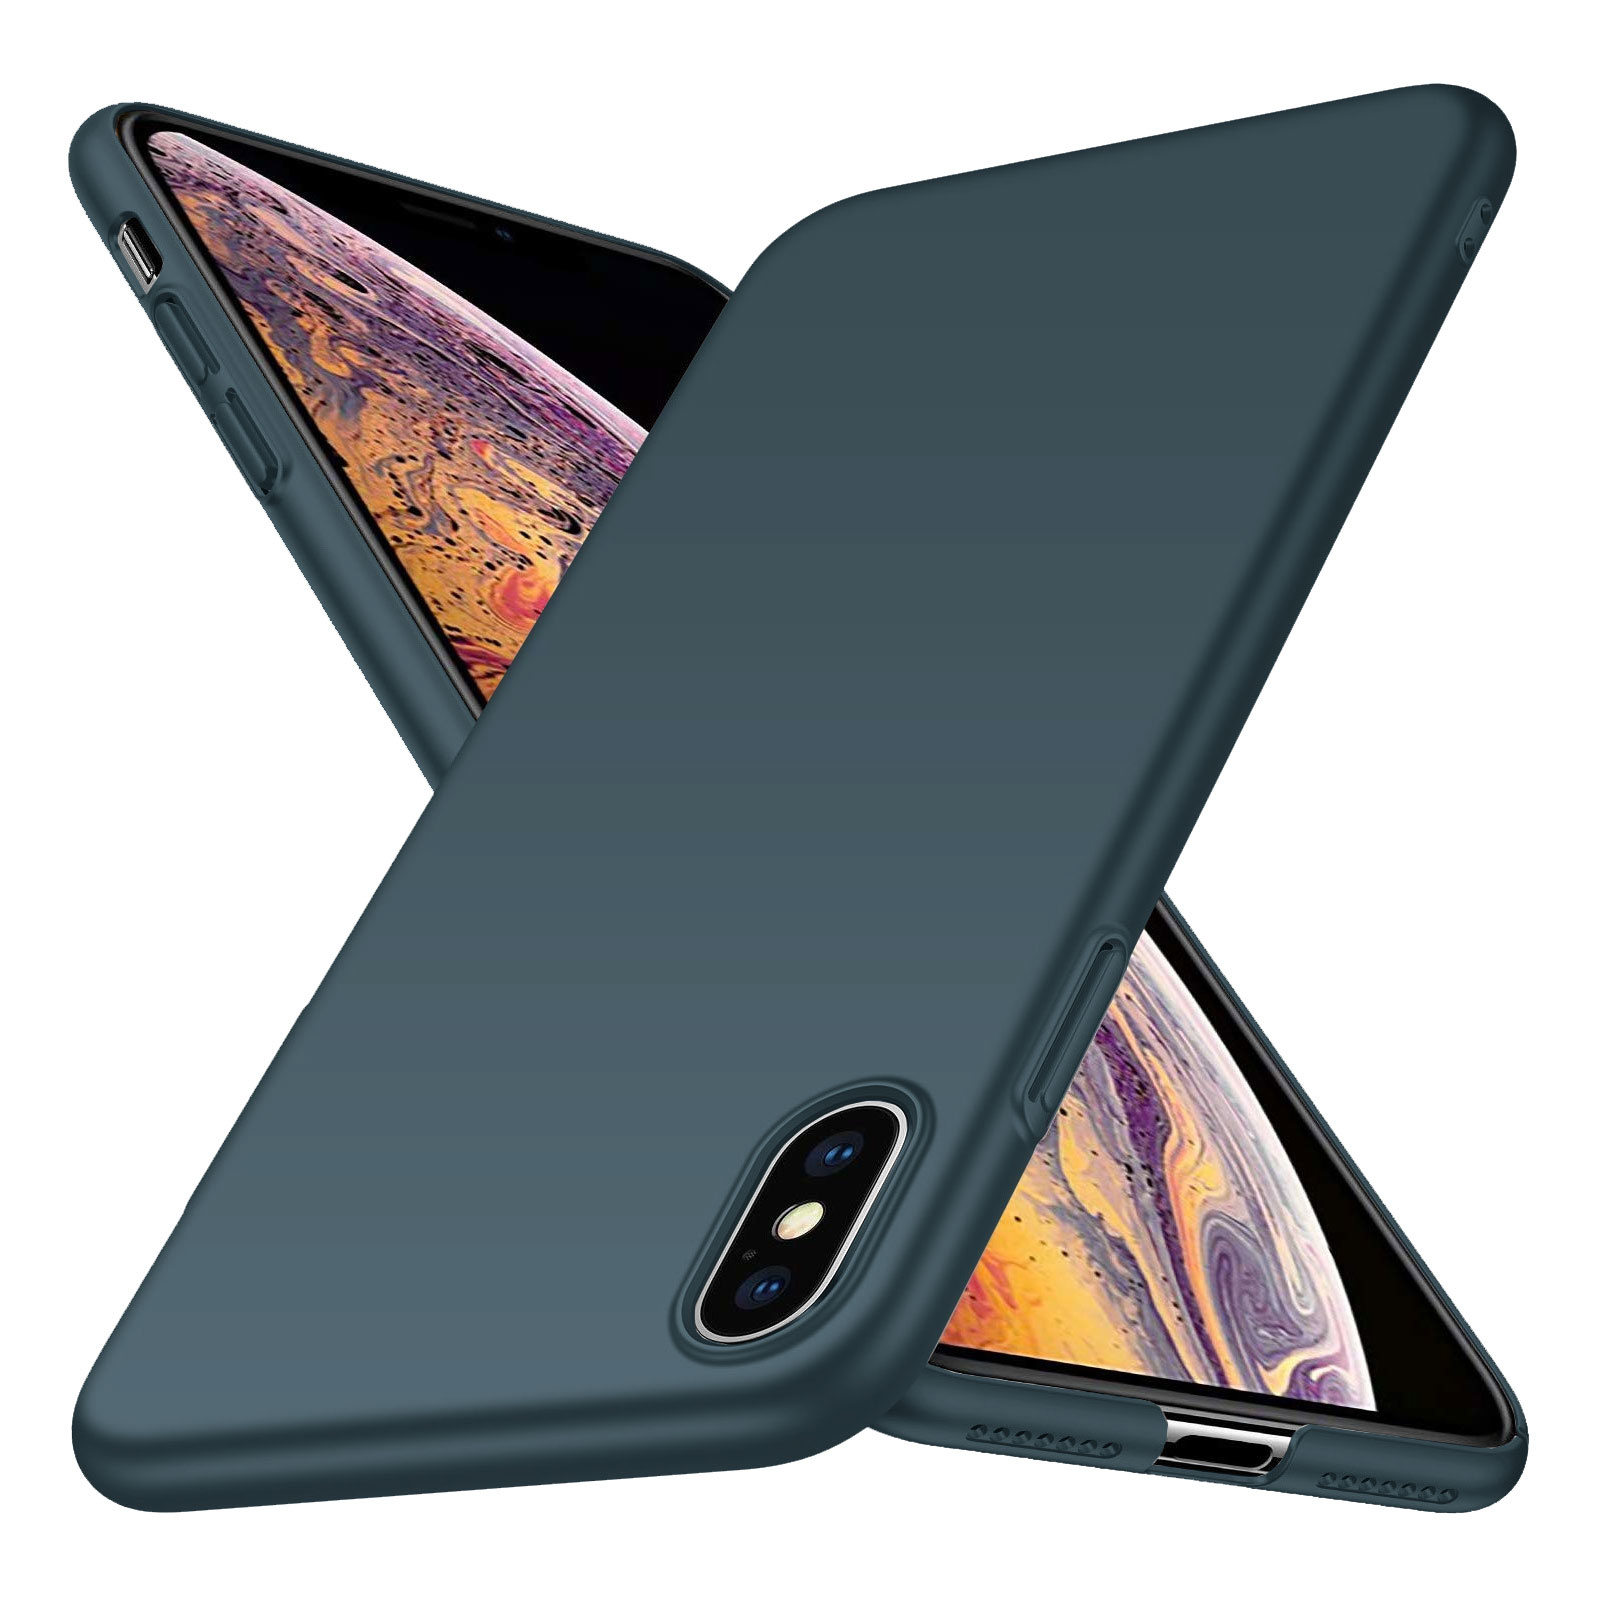 paniek Mooie vrouw India Back Case Cover iPhone Xs Max Hoesje Green Forest - Geeektech.com